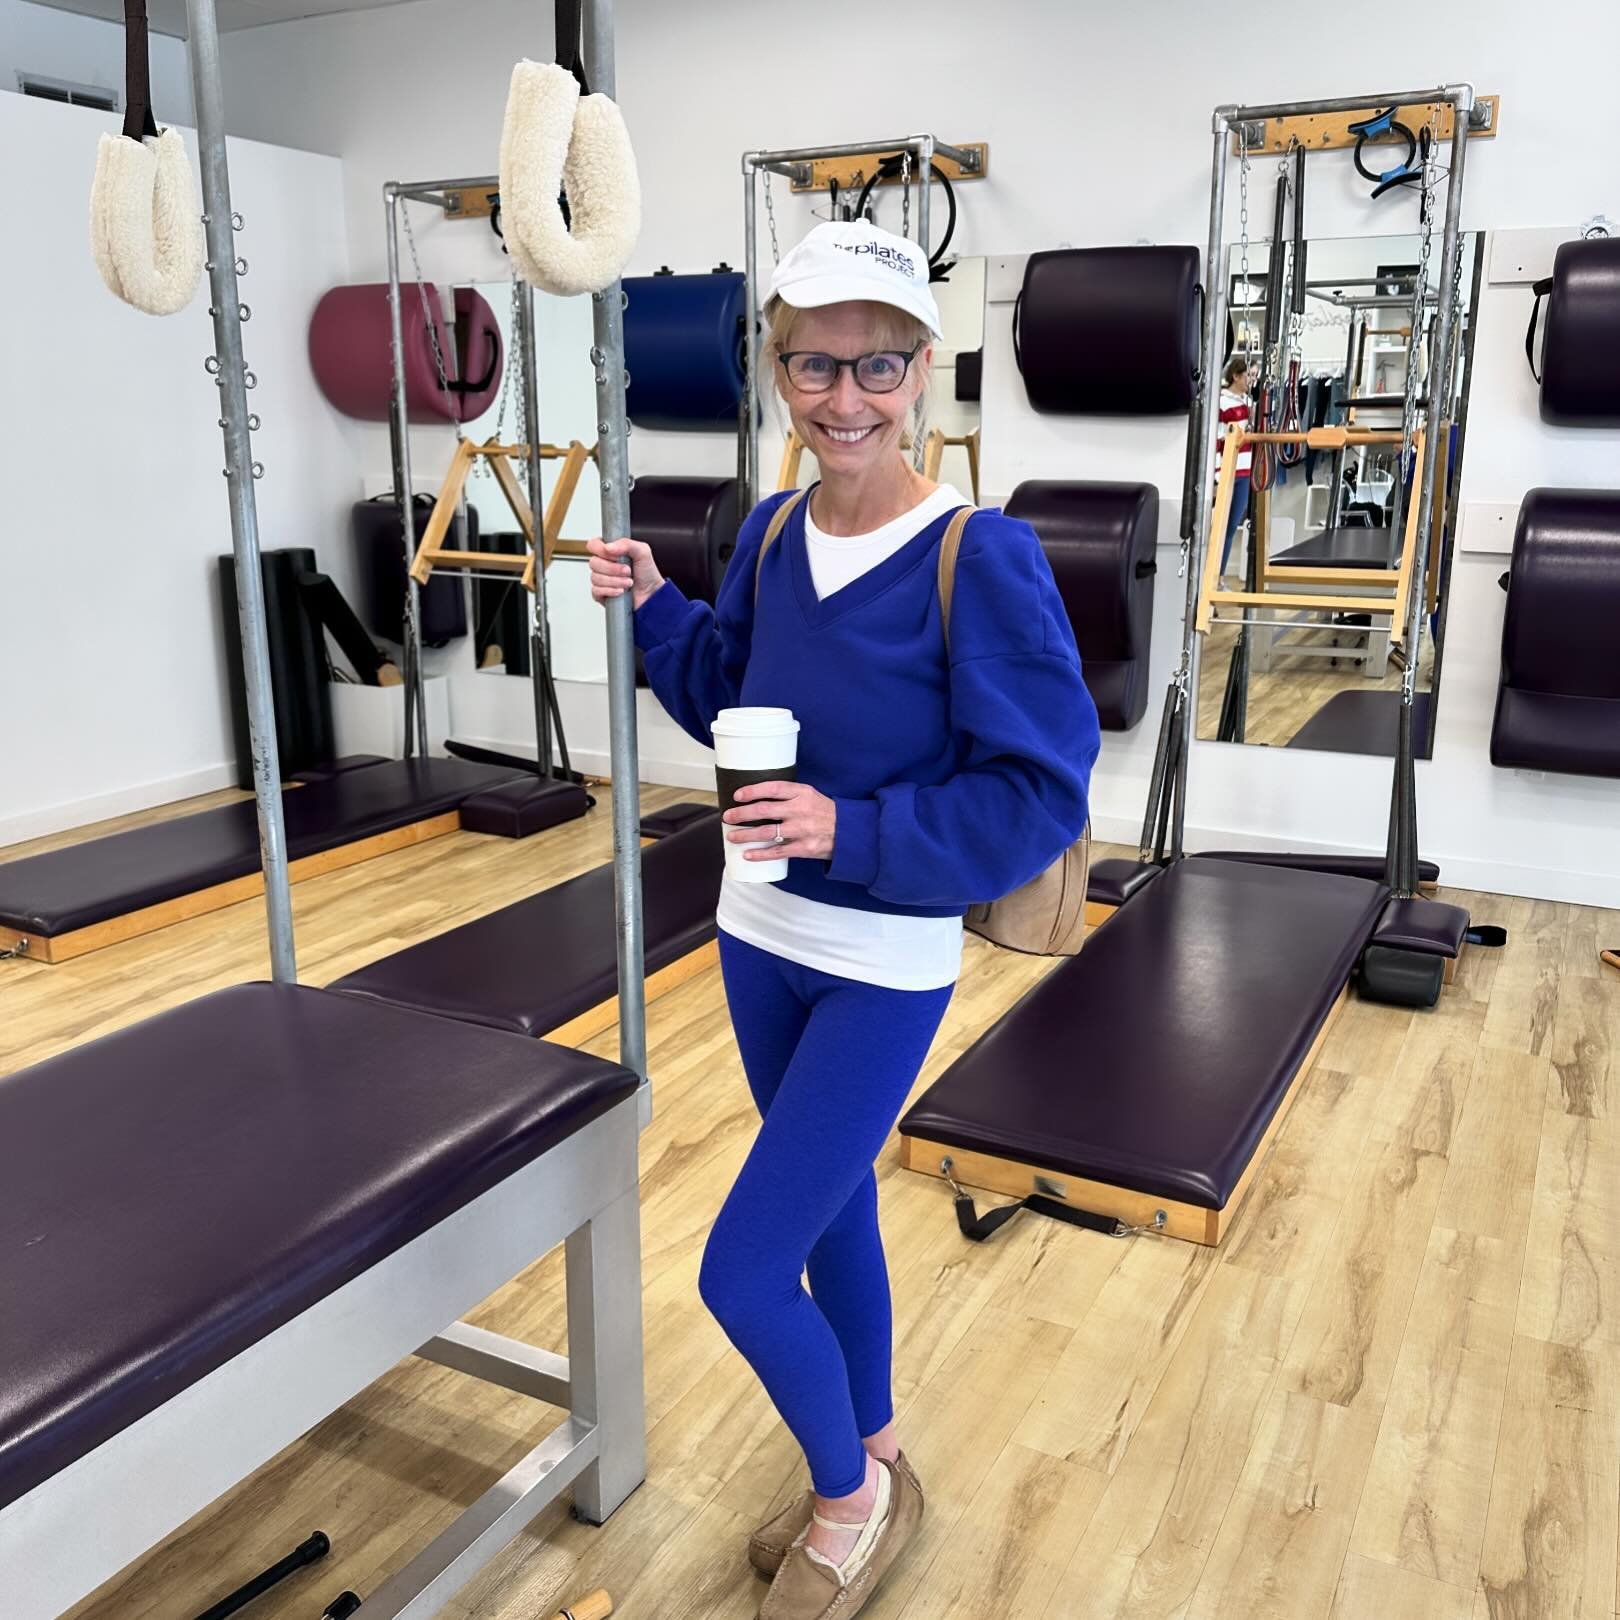 Fifty and Fabulous! Happy Birthday to one of our favorite Pilates devotees Meredith! May your abs stay strong and your spine stay long! 🥂🎈
@ed_recovery_mo #fifty #fitandfifty #pilates #fairhaven #pilatesproject #pilatesclients #realpilates